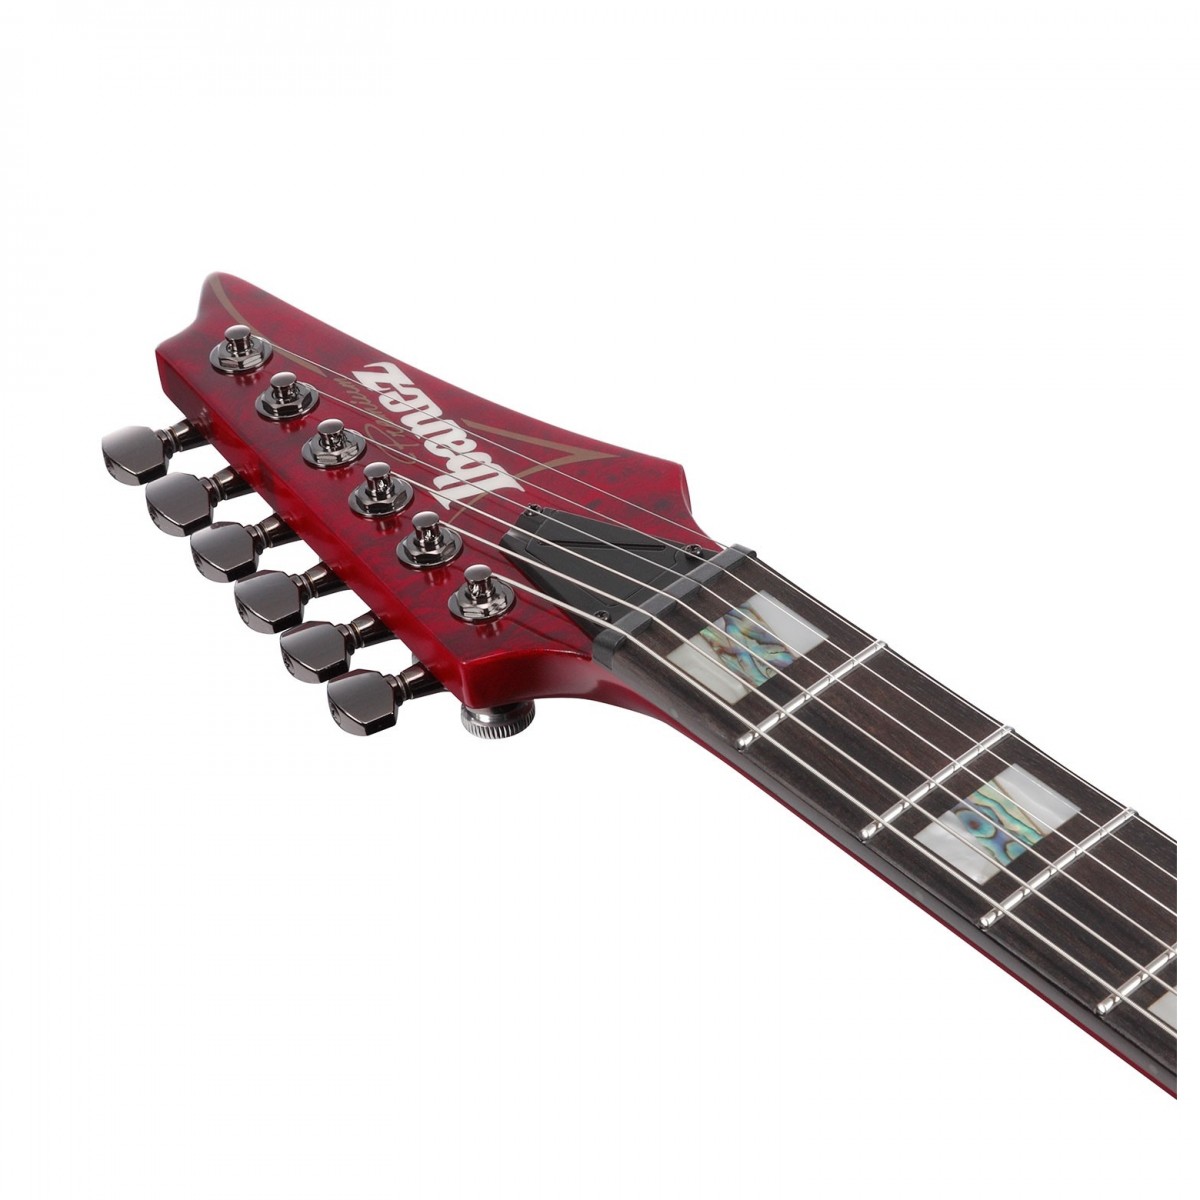 Ibanez Rgt1221pb Swl Premium 2h Dimarzio Ht Eb - Stained Wine Red Low Gloss - Str shape electric guitar - Variation 4